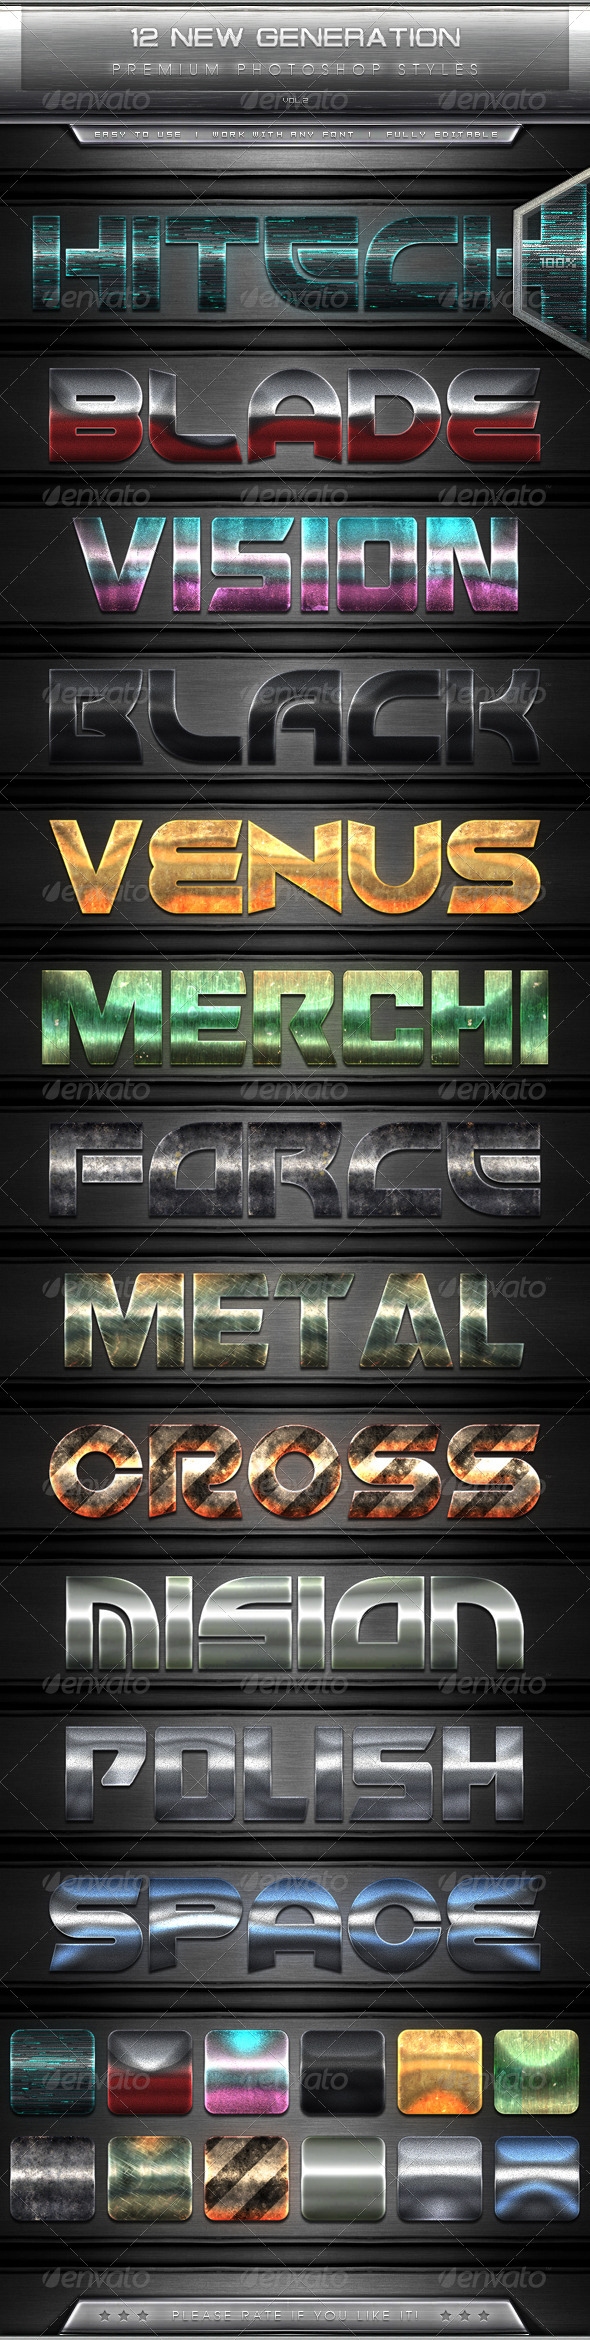 GraphicRiver 12 New Generation Text Effect Styles Vol.2 7663026